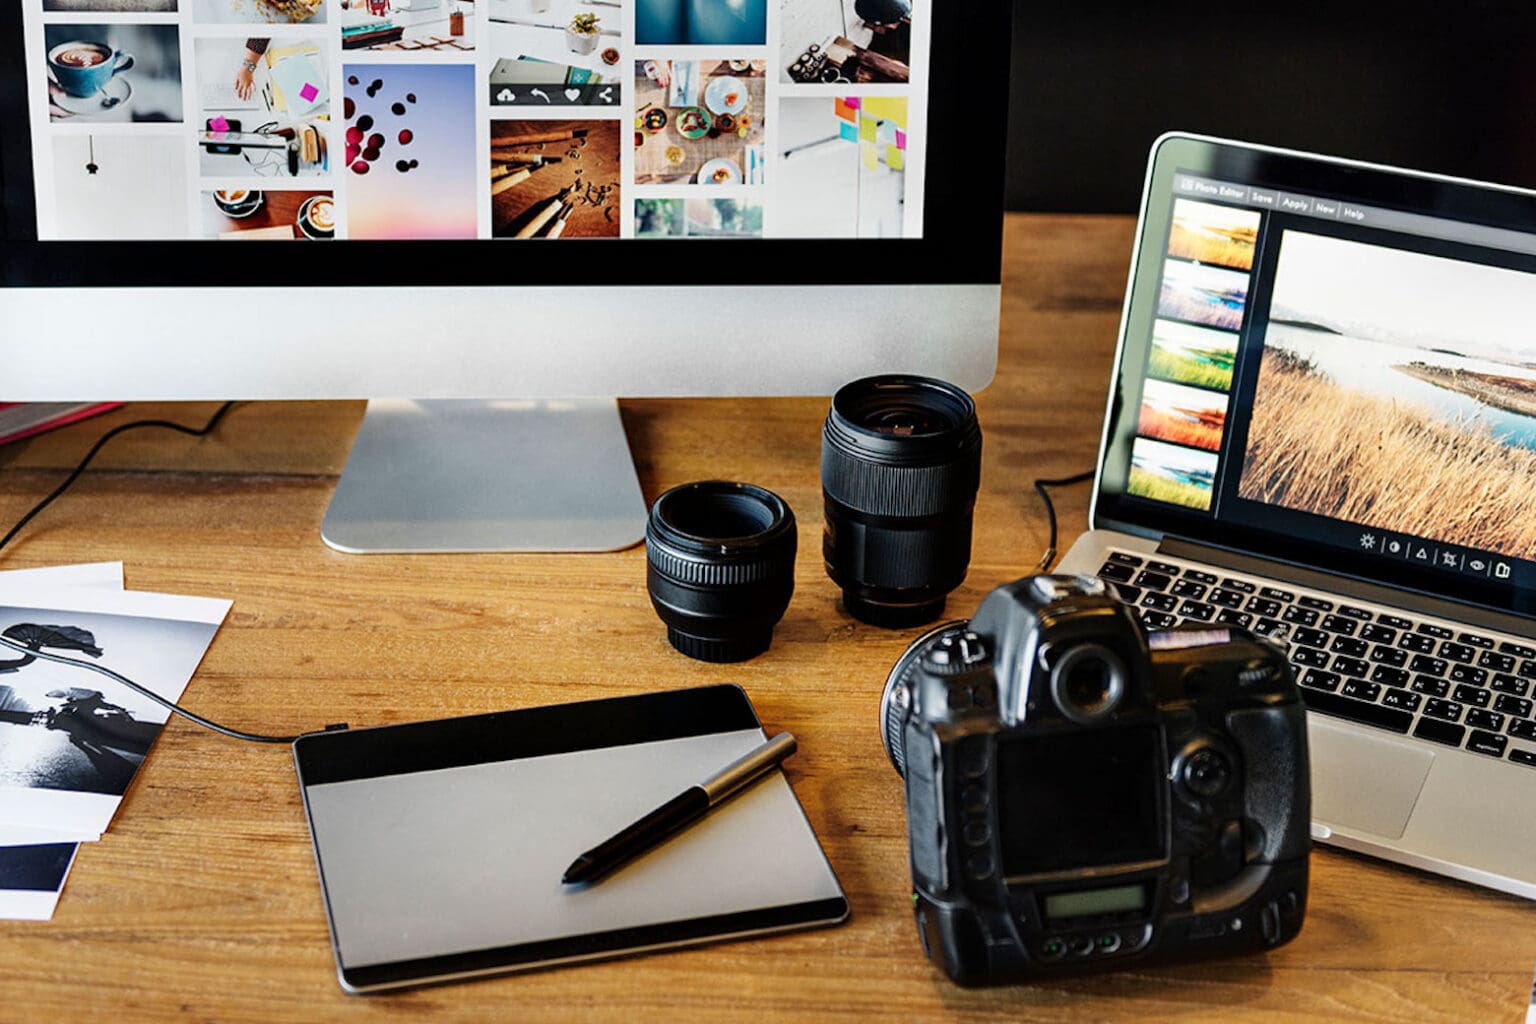 Make your photos sing with this top editing software for only $80.